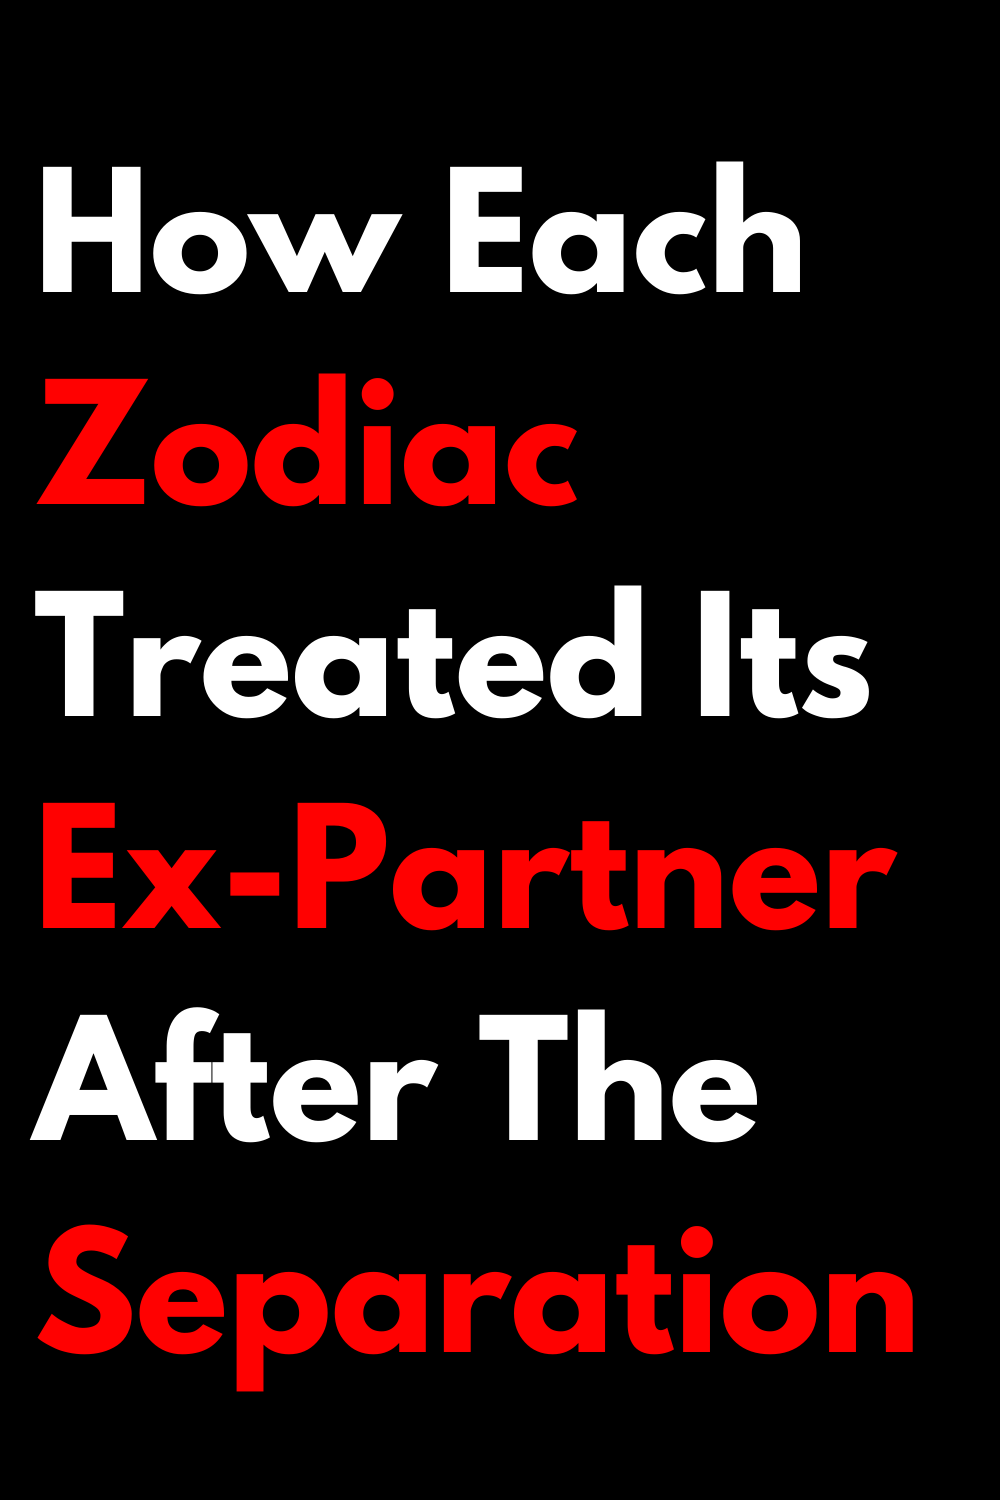 How Each Zodiac Treated Its Ex-Partner After The Separation